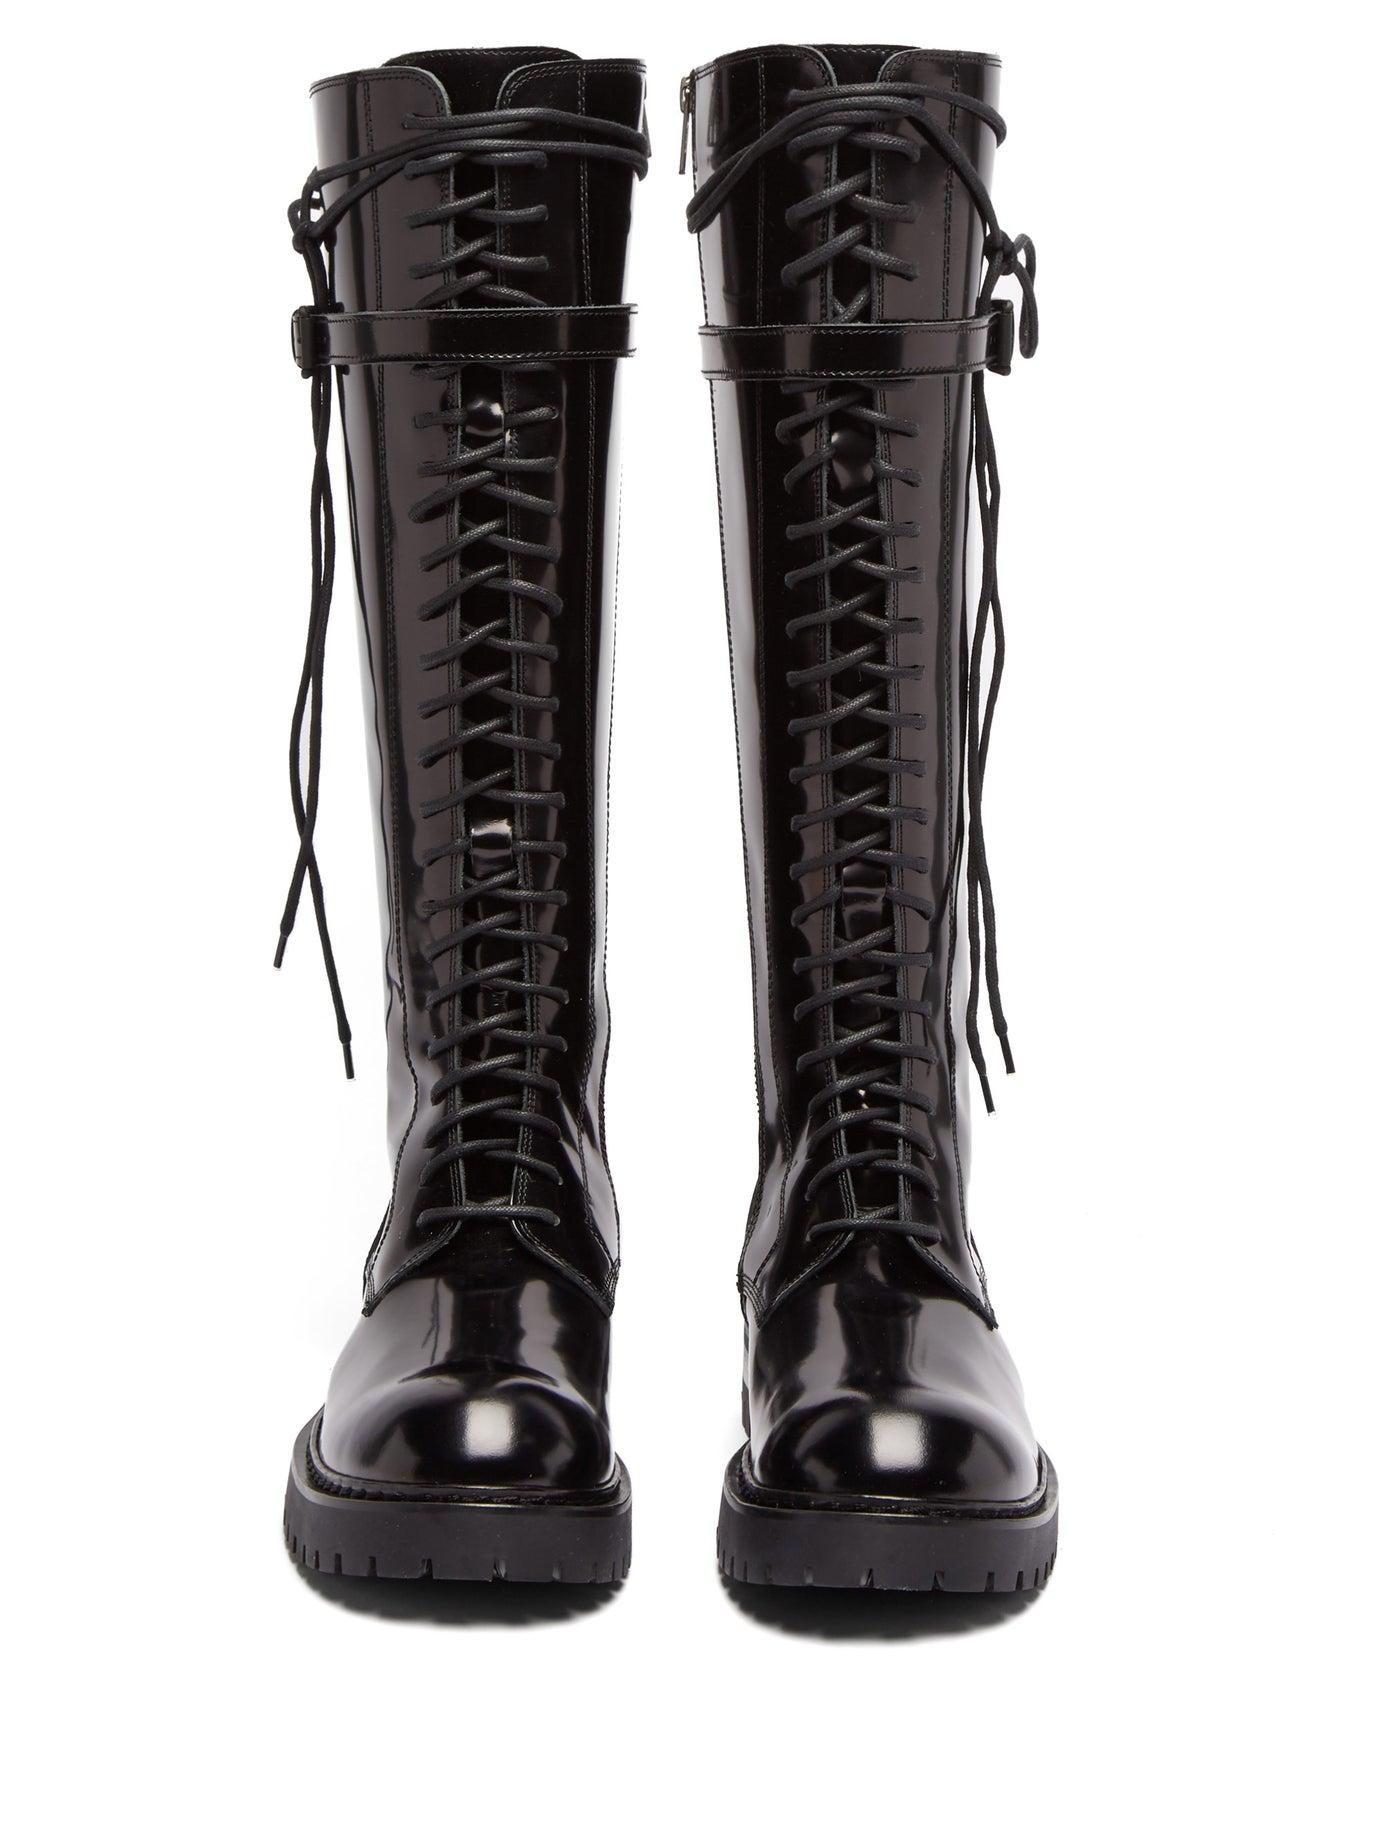 Ann Demeulemeester Knee High Lace Up Patent Leather Boots in Black - Lyst